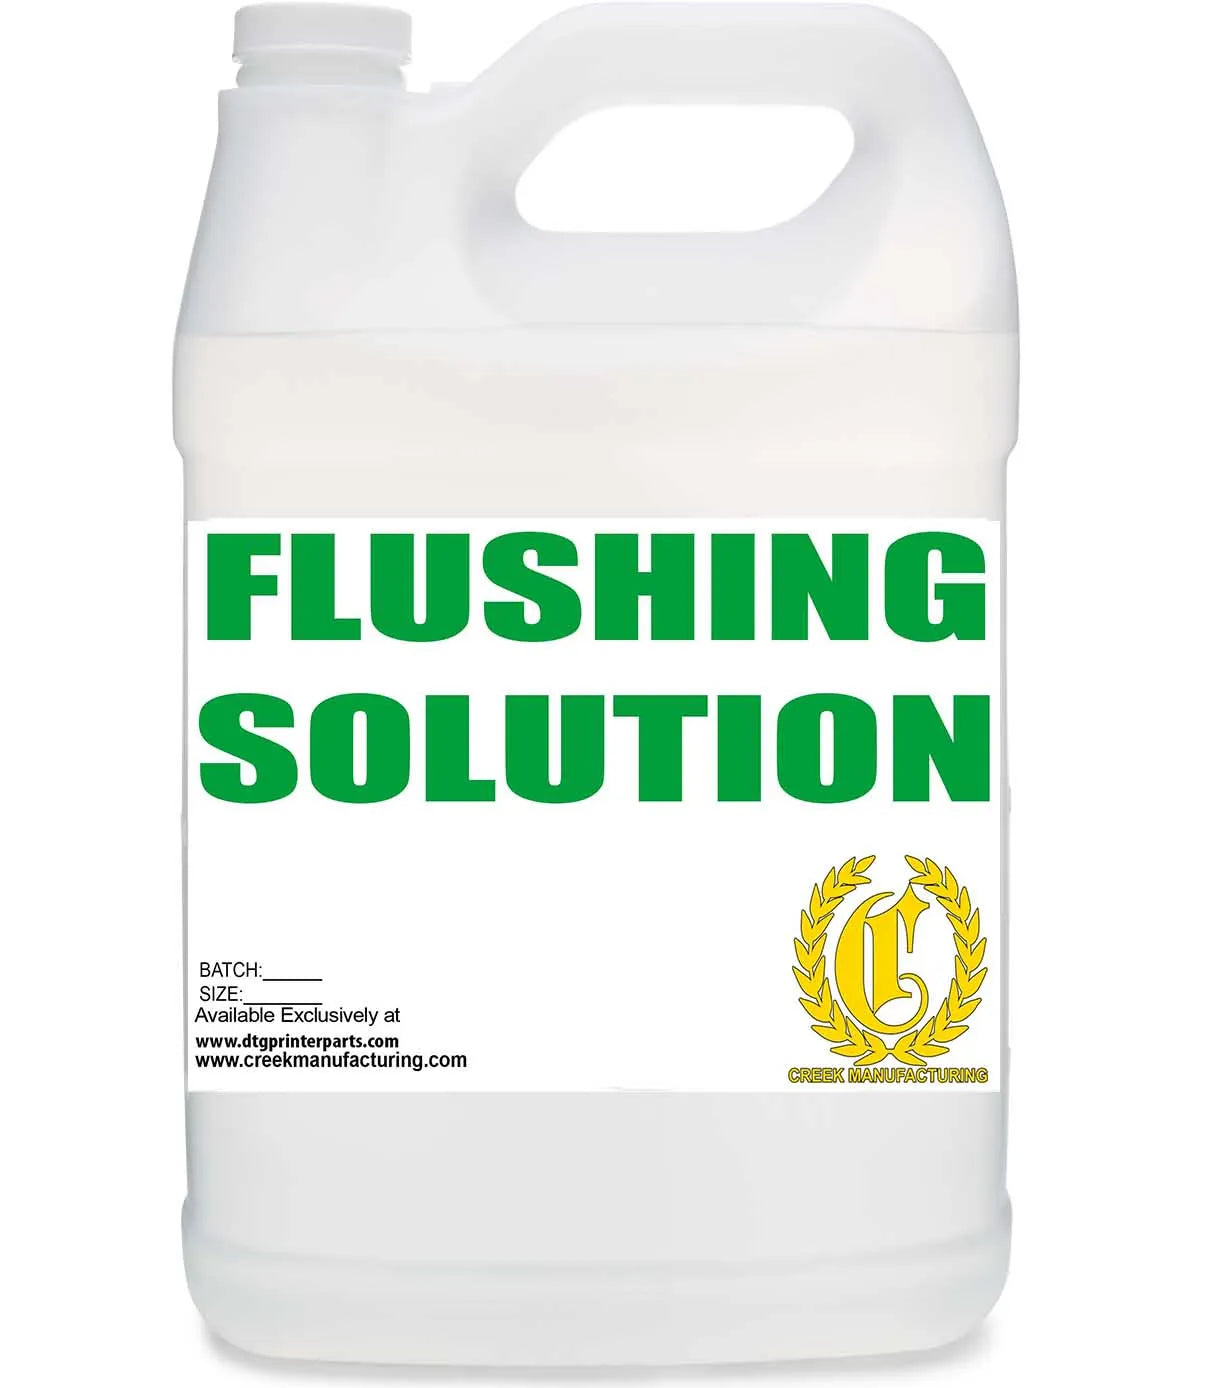 Flushing Solution for DTG and Direct To Film Printers